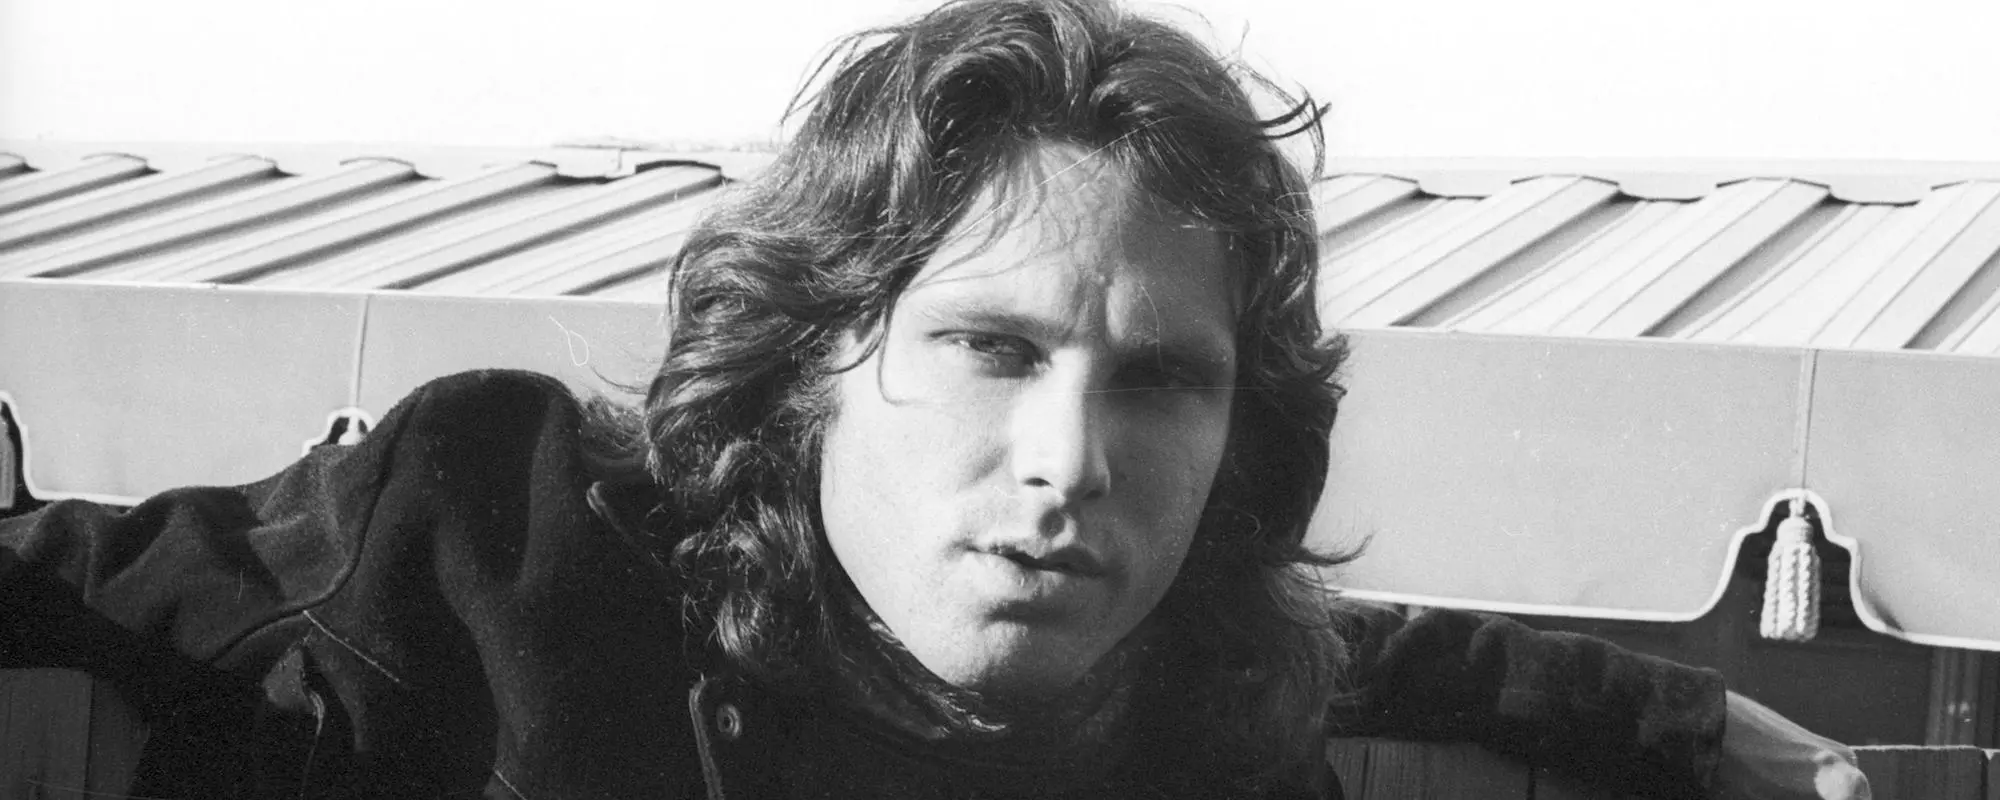 5 Jim Morrison Poems That Became Songs by The Doors After His Death